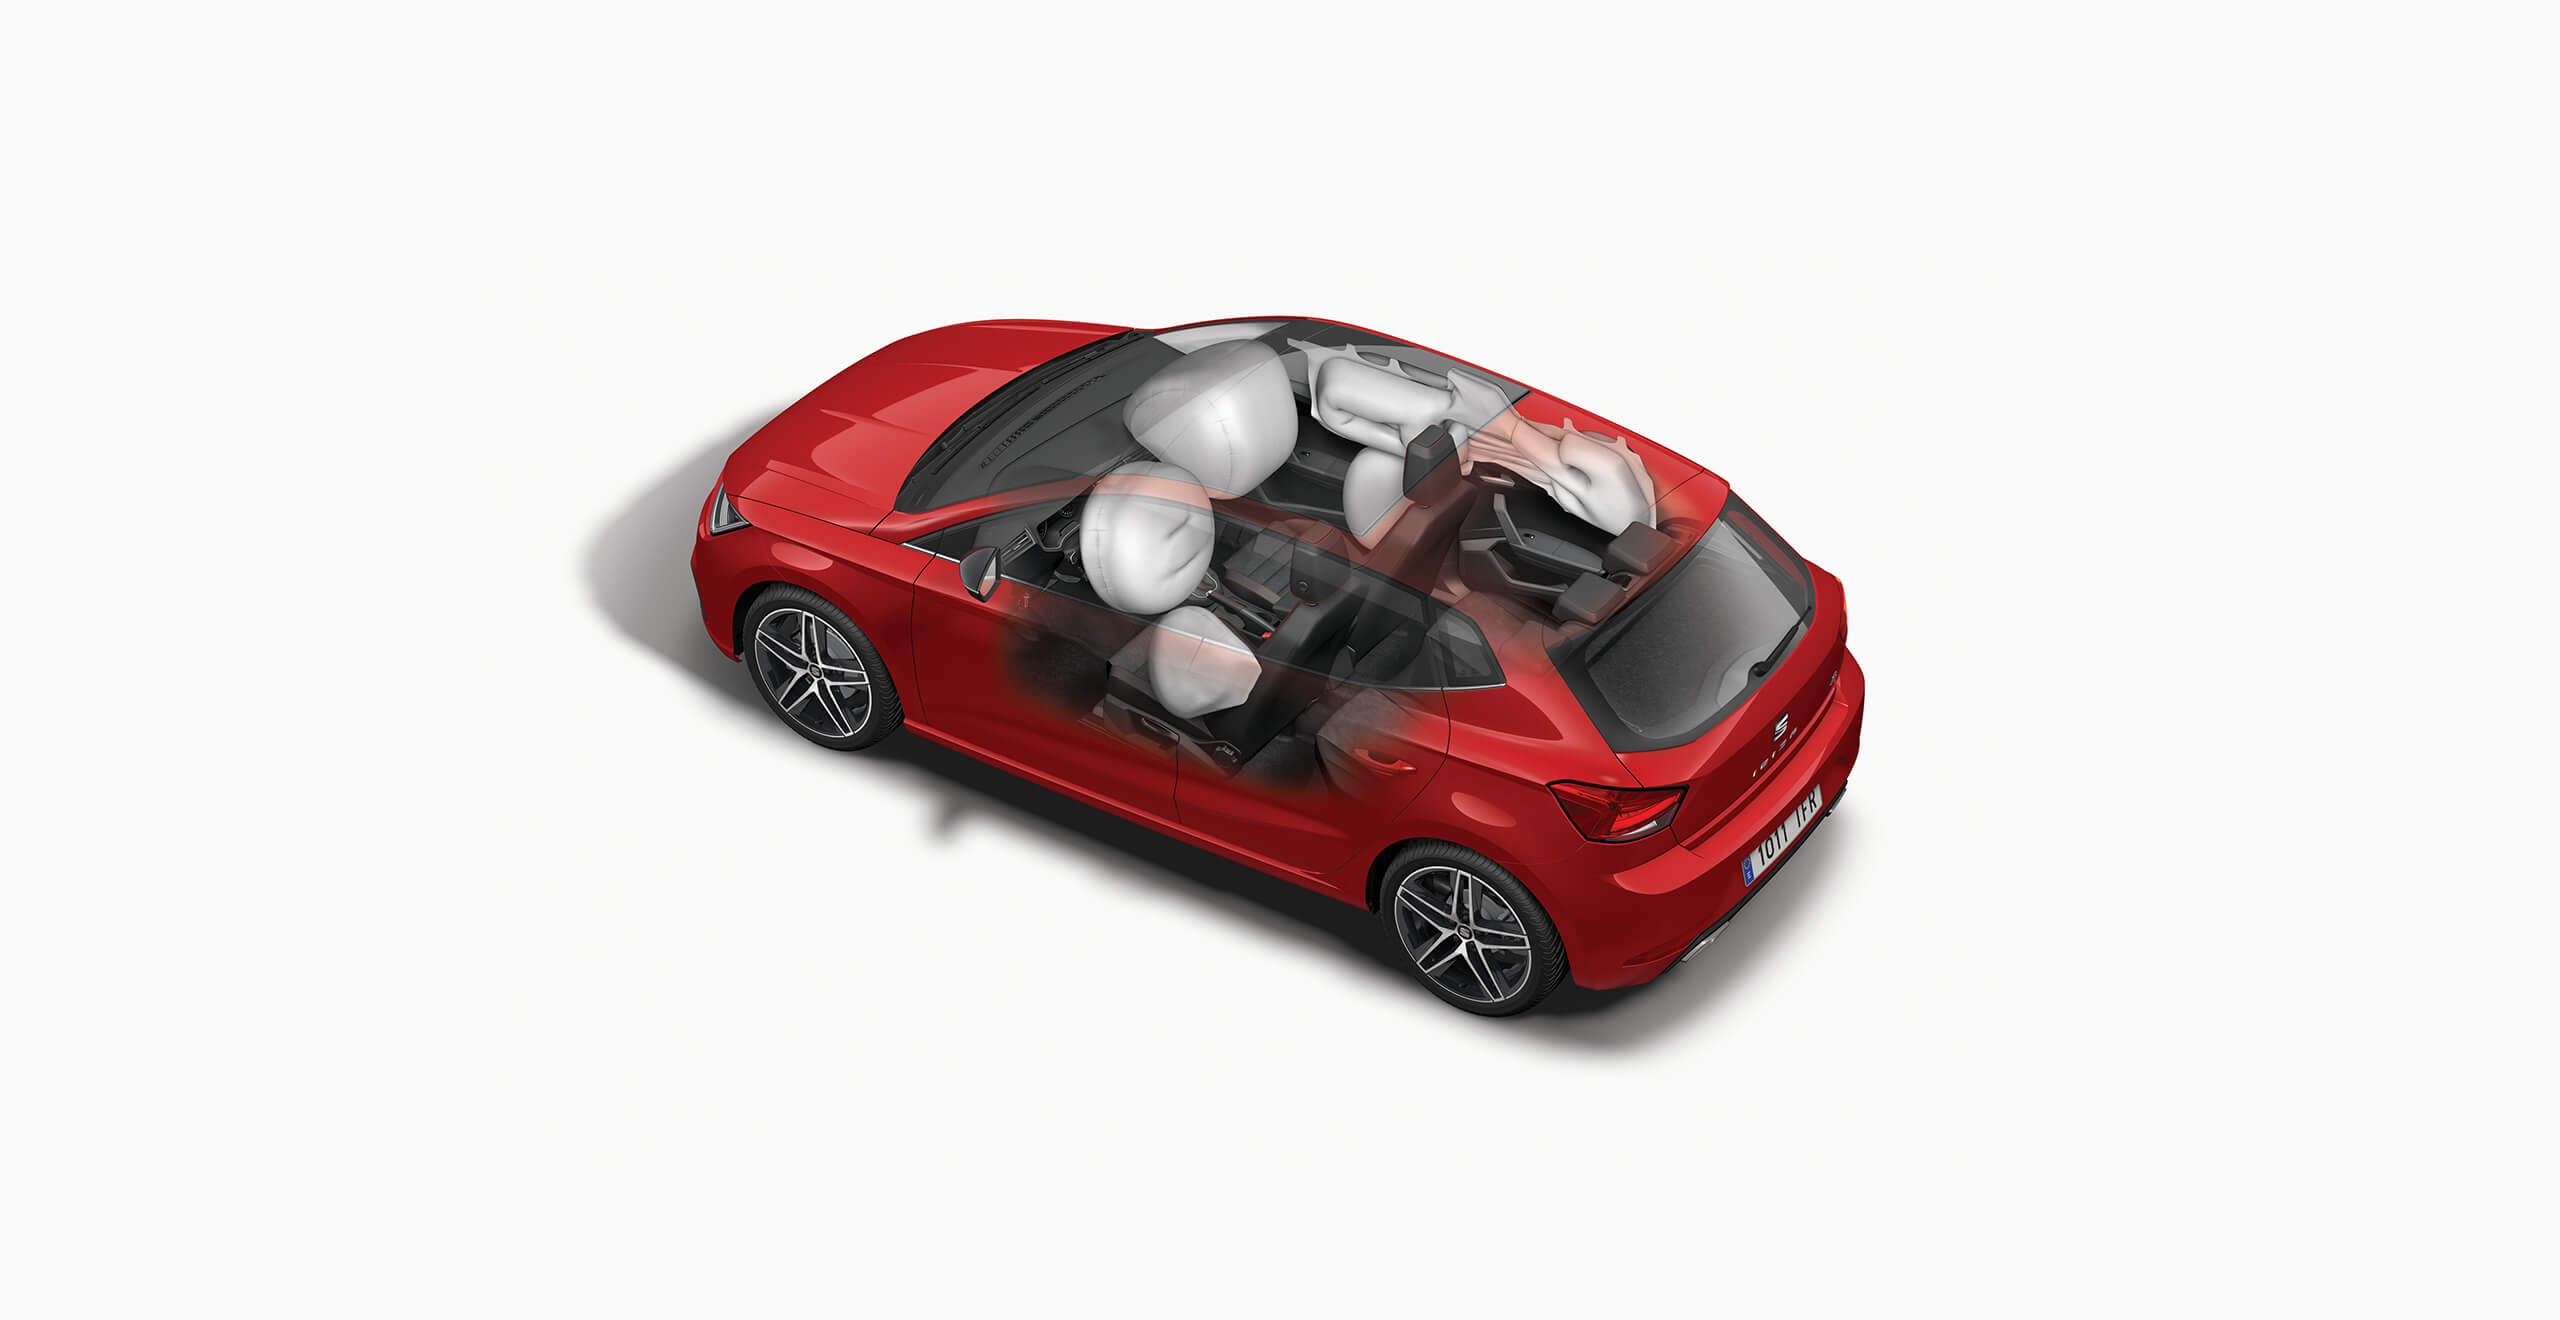 New SEAT Ibiza detailed airbags